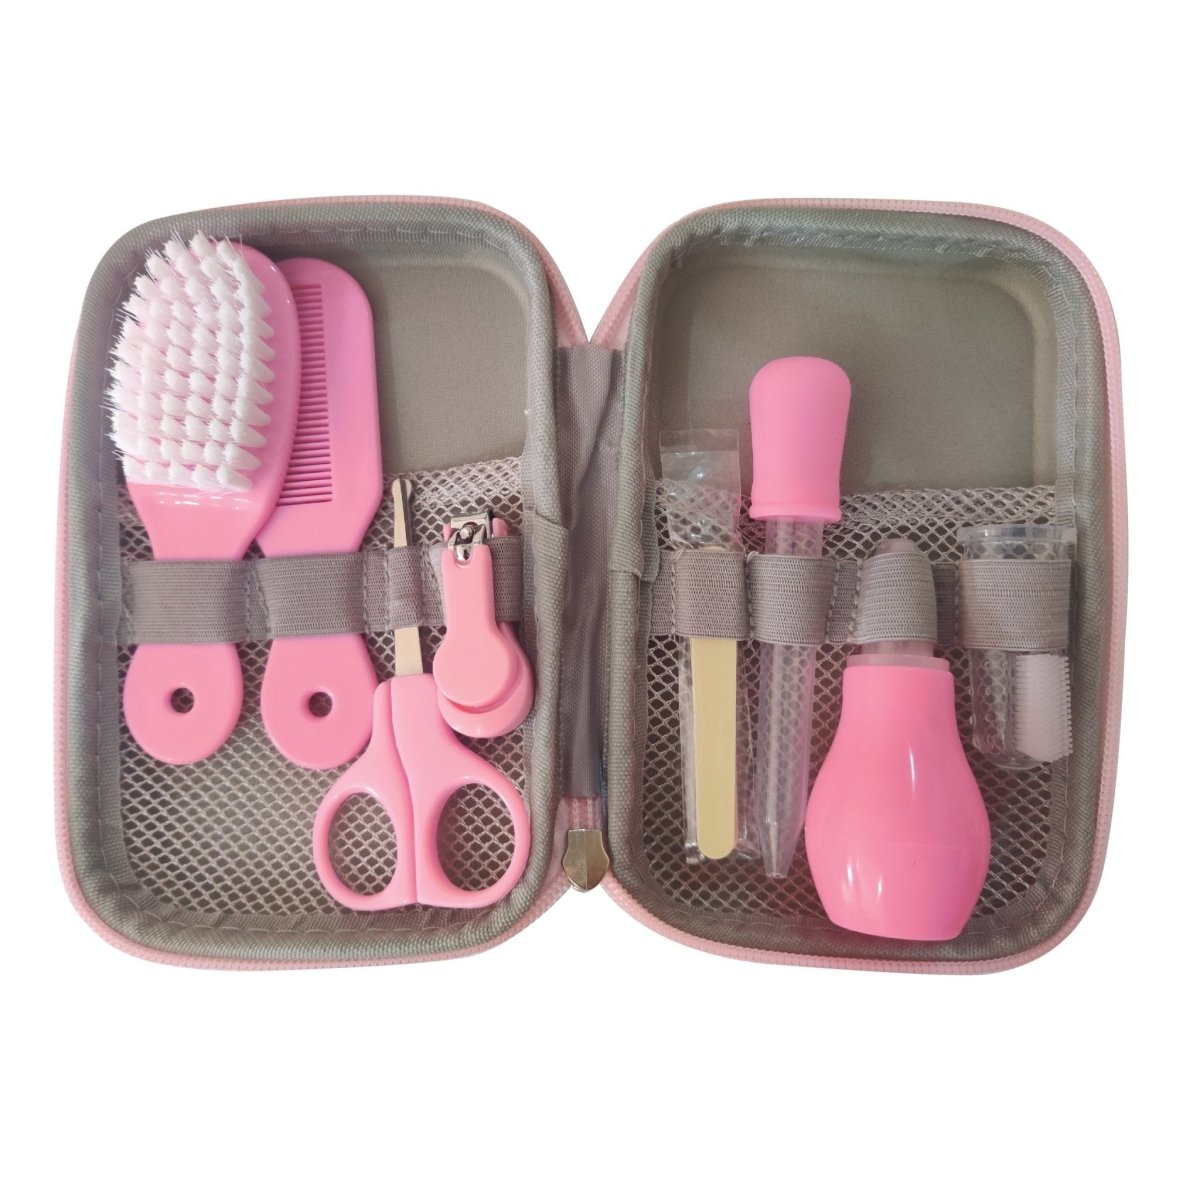 Baby Travel and Grooming Kit- Pink - BAB-GRM-PNK